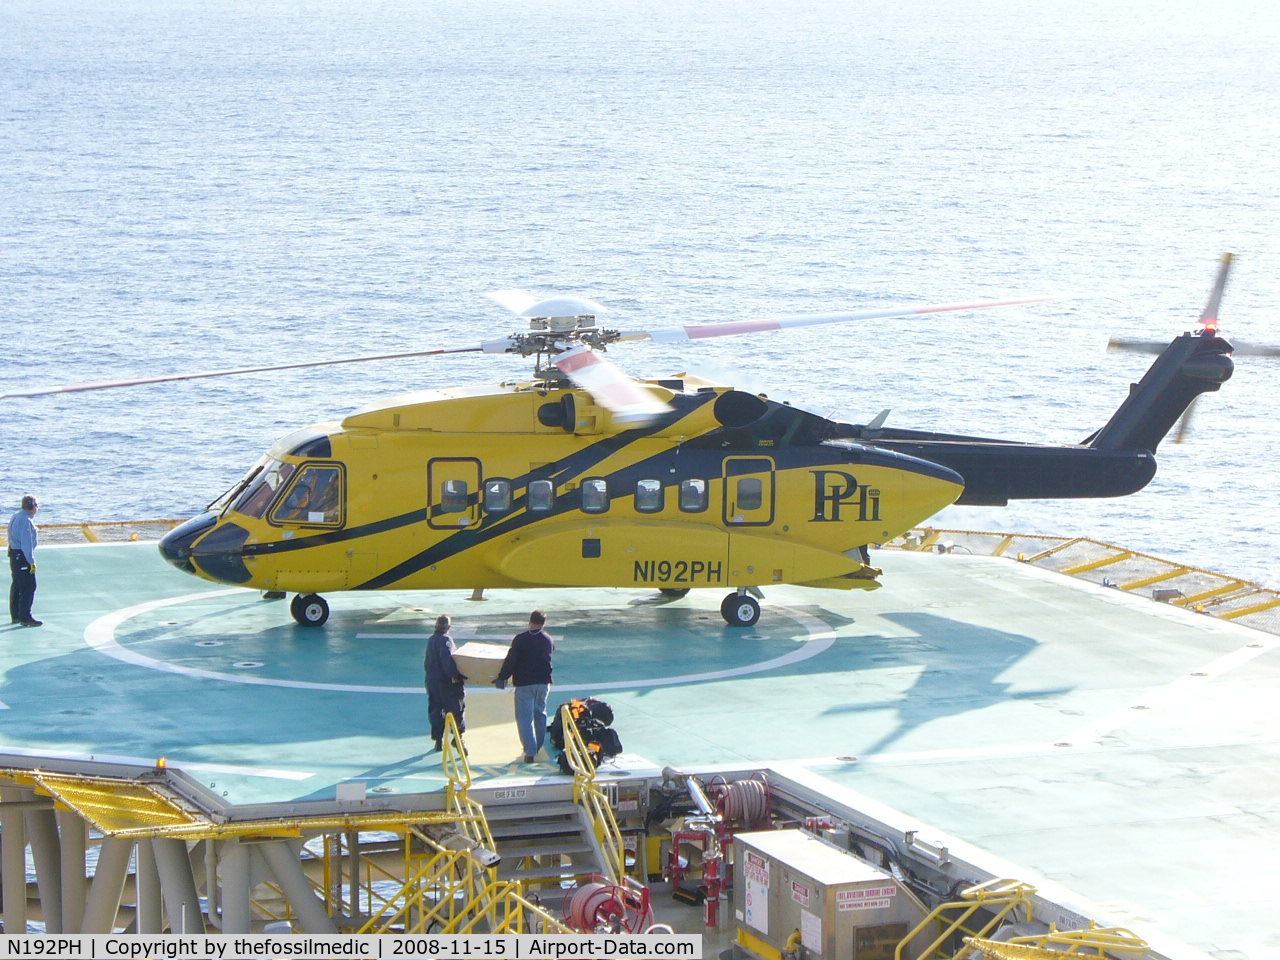 N192PH, 2004 Sikorsky S-92A C/N 920006, Sitting on the deck at Green Canyon 787 in the Gulf of Mexico